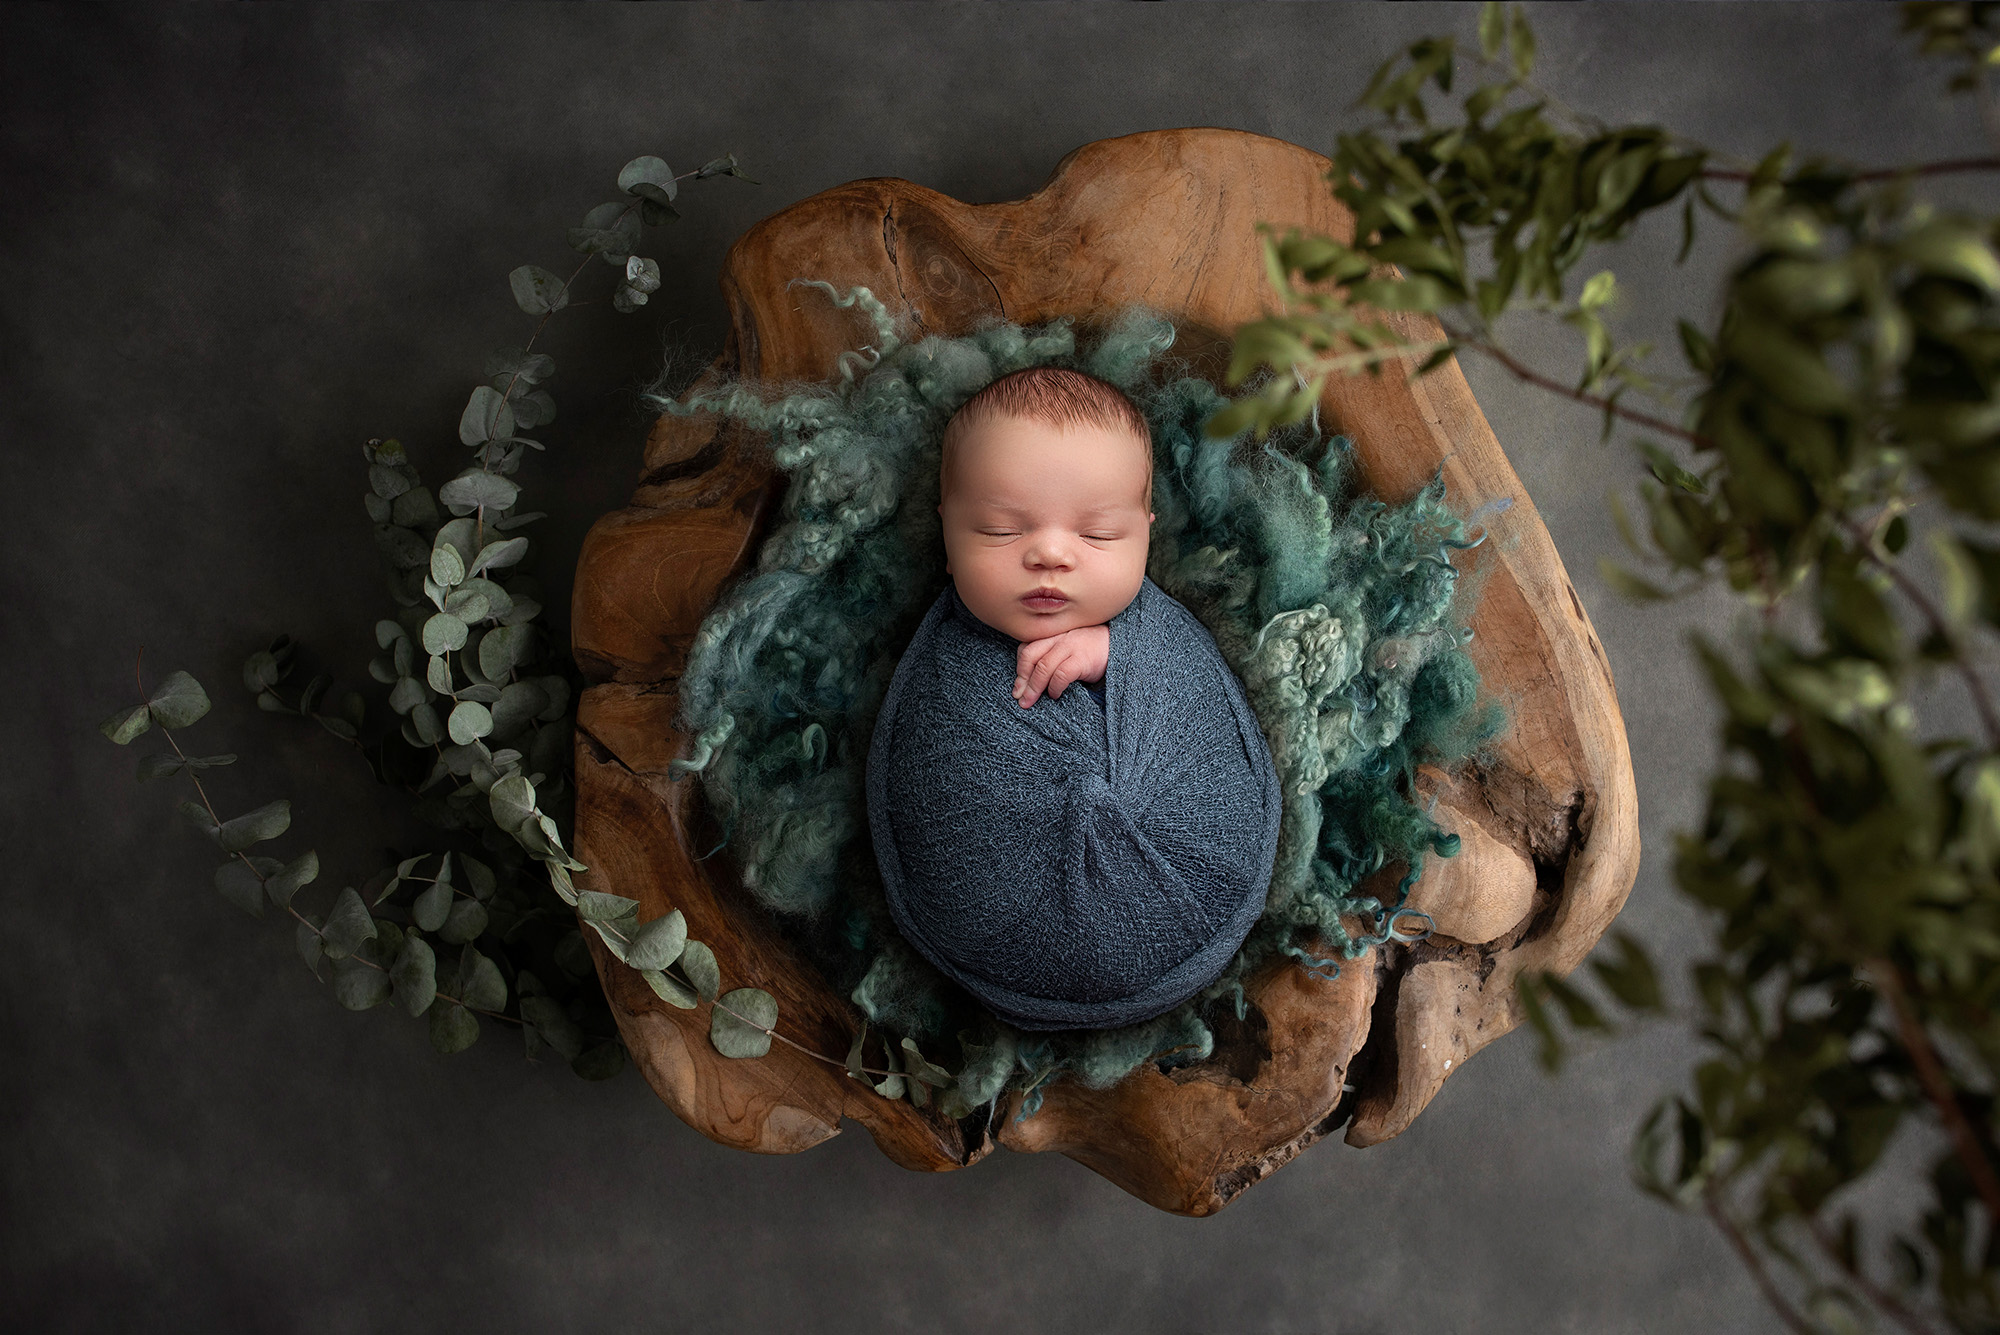 newborn baby boy asleep on wooden bowl surrounded by greenery